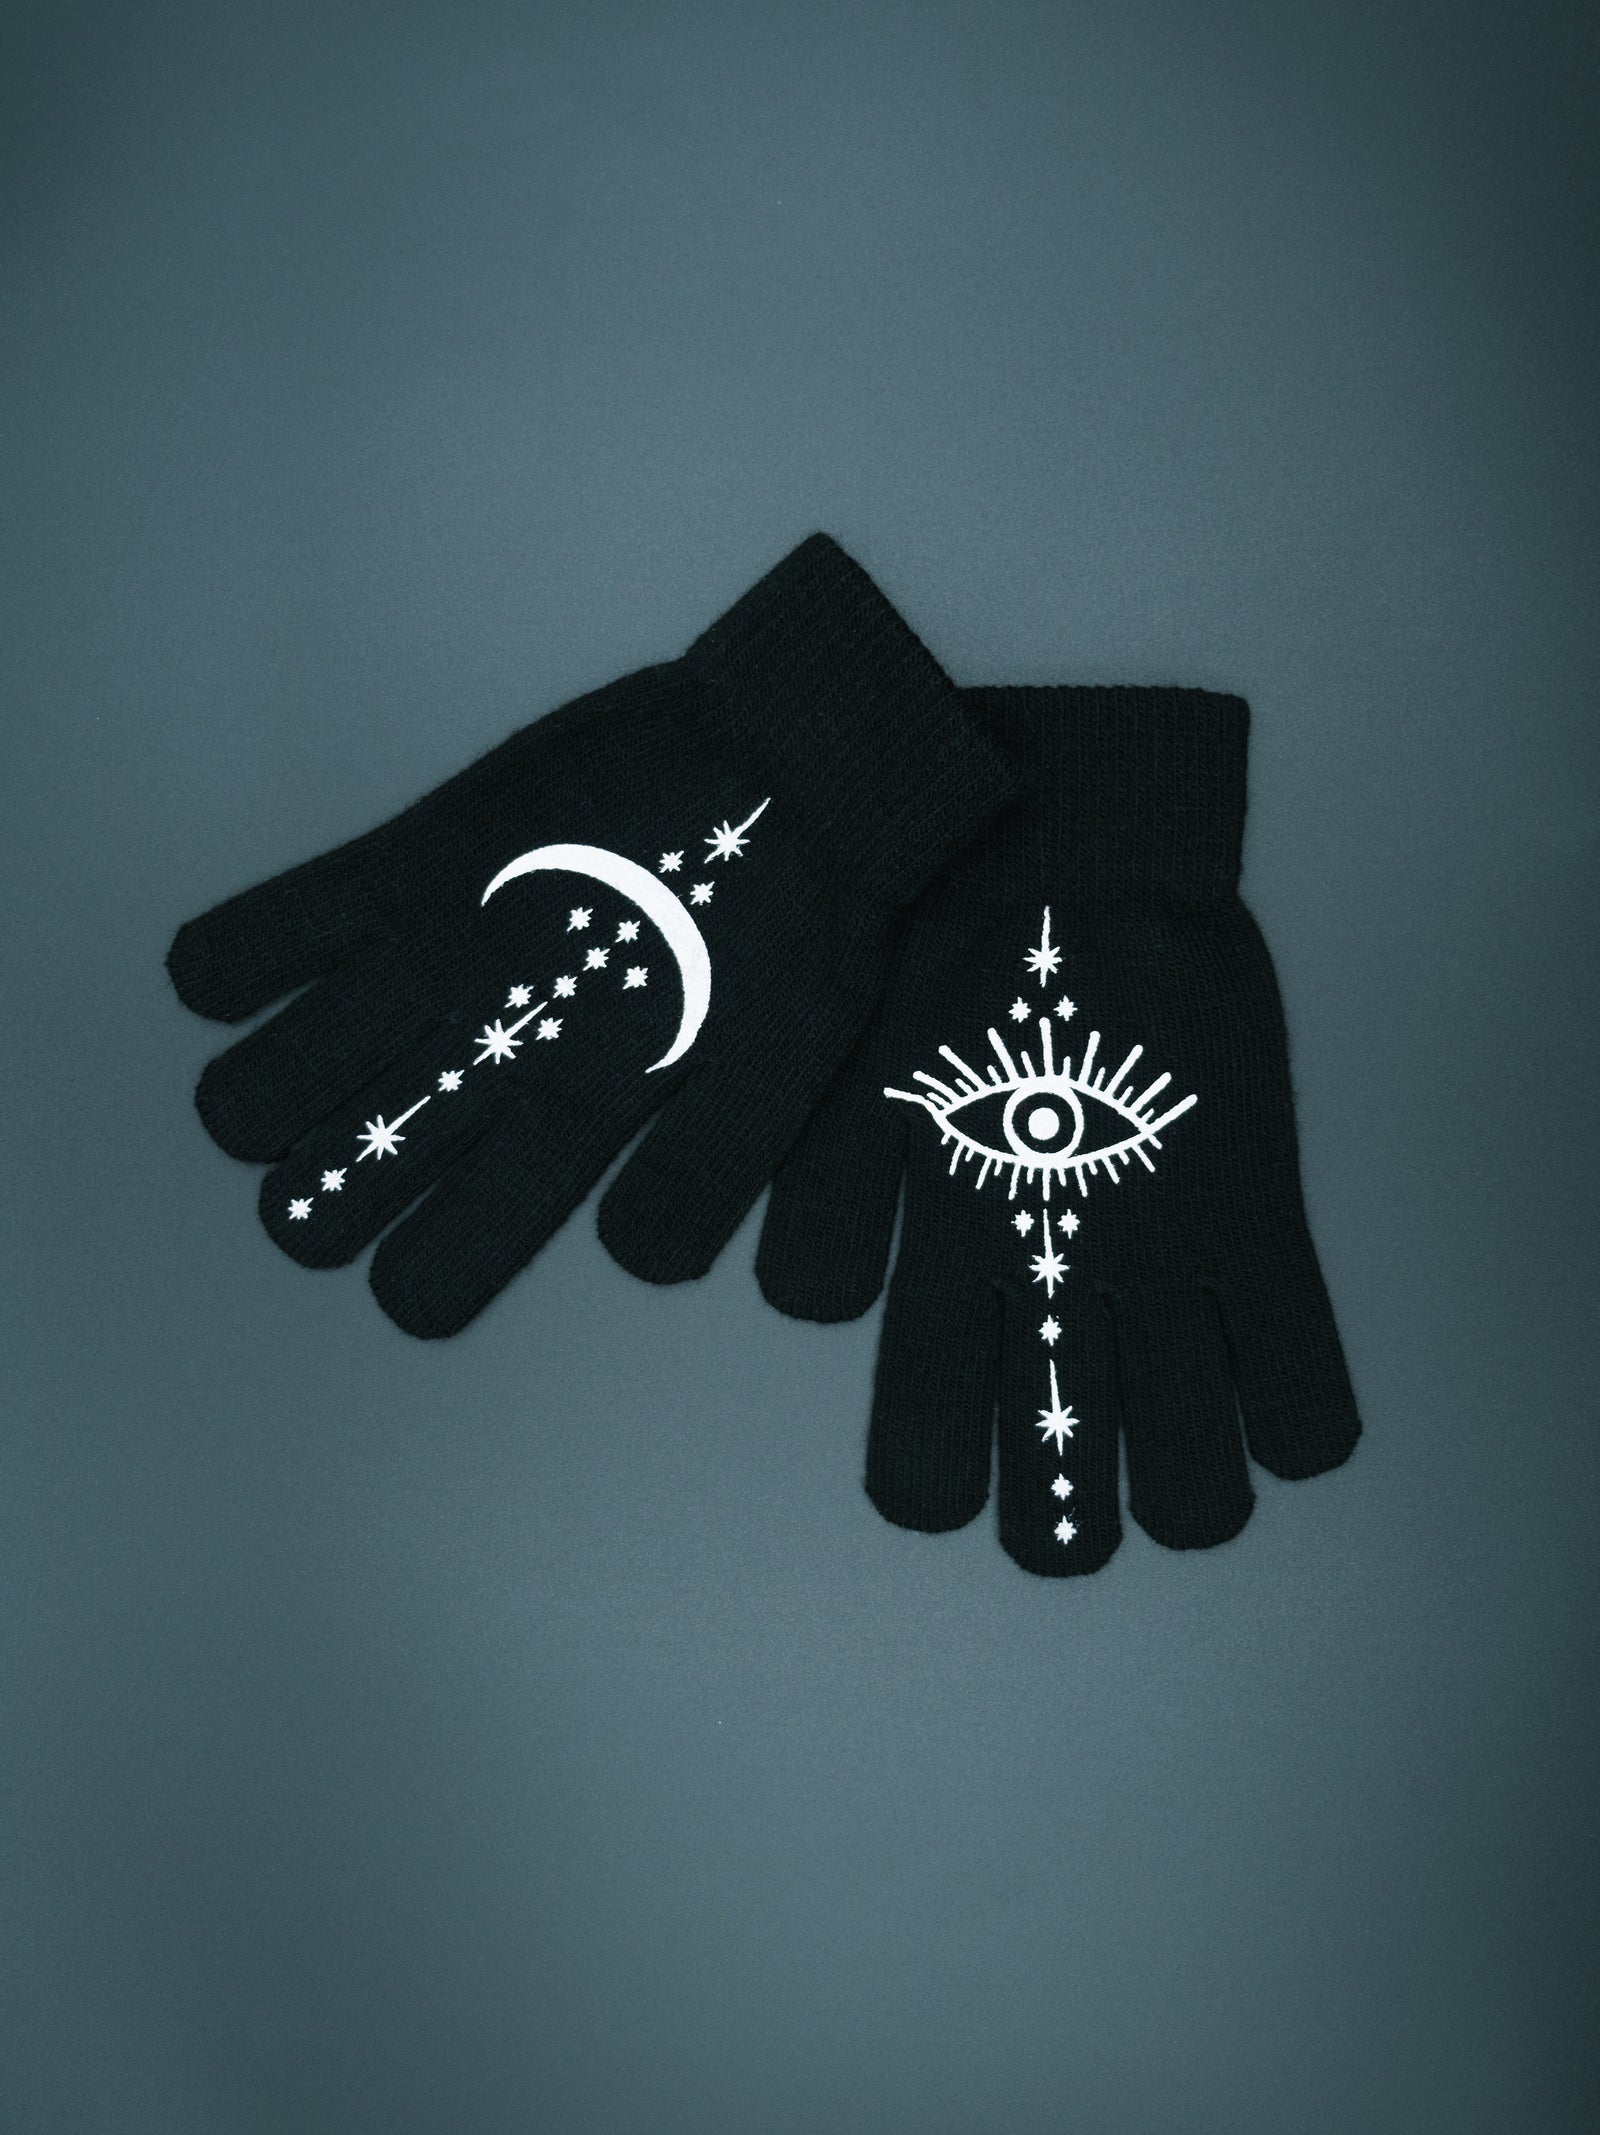 Occult Eye and Moon Knit Gloves